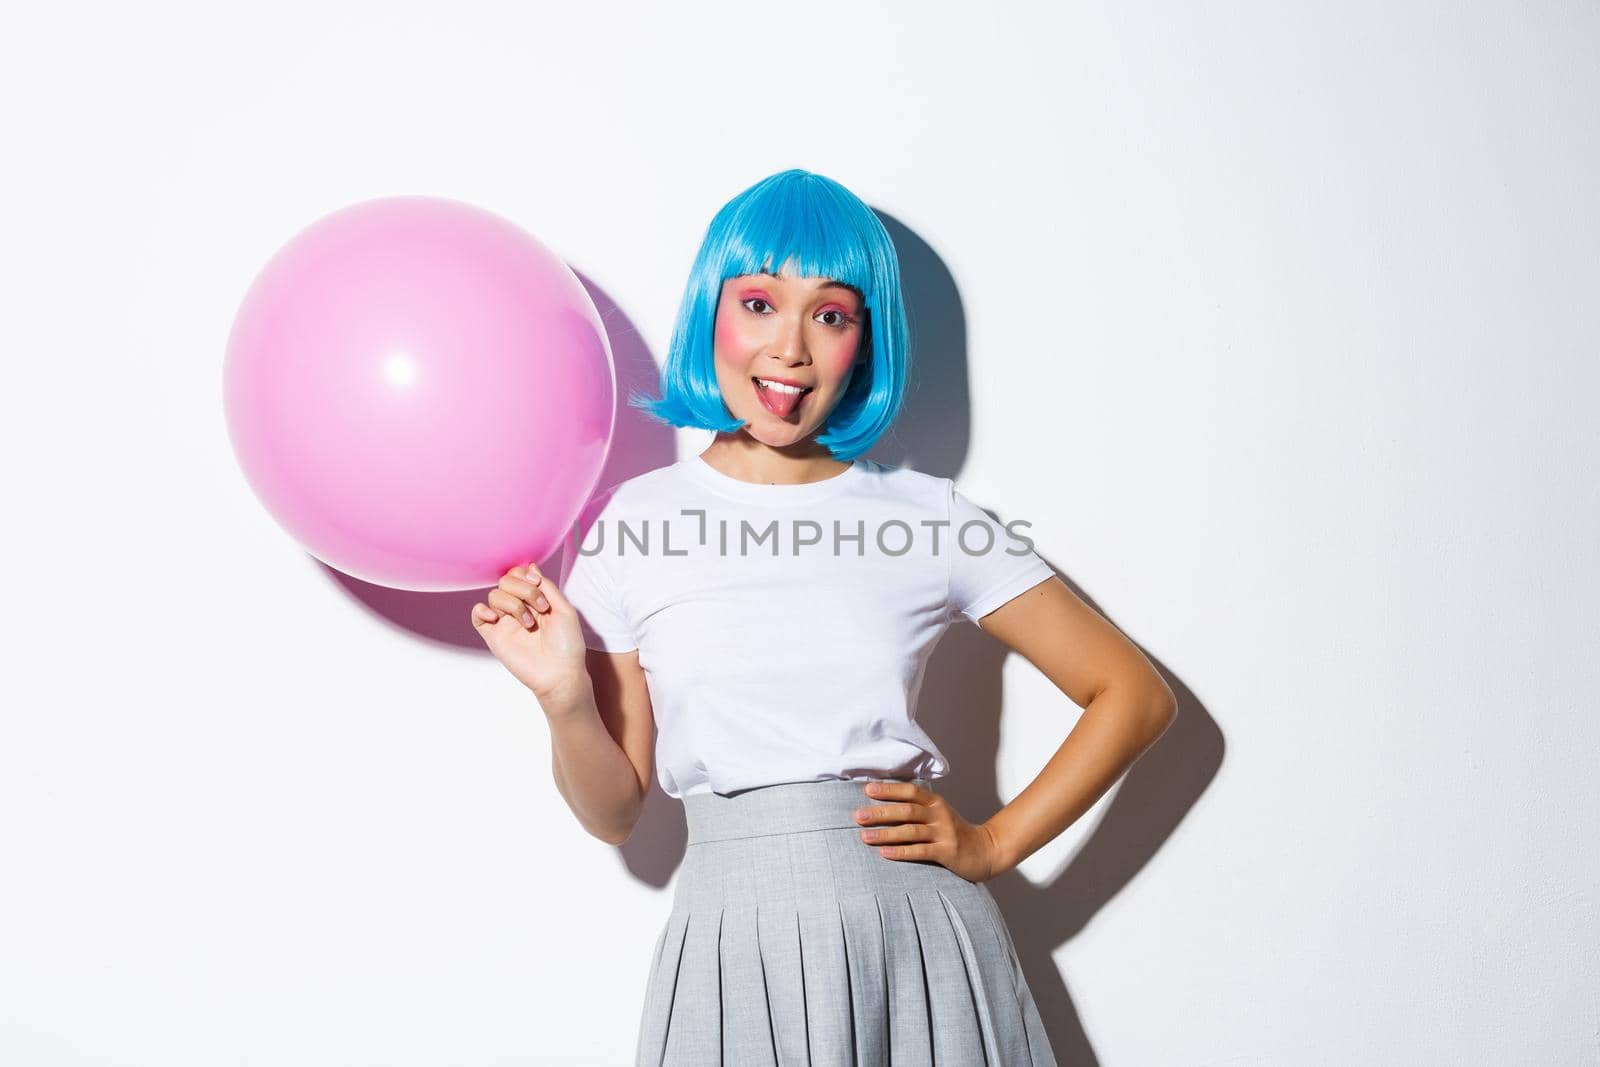 Image of silly party girl in blue wig celebrating holiday, holding pink balloon and showing tongue, standing over white backgound.